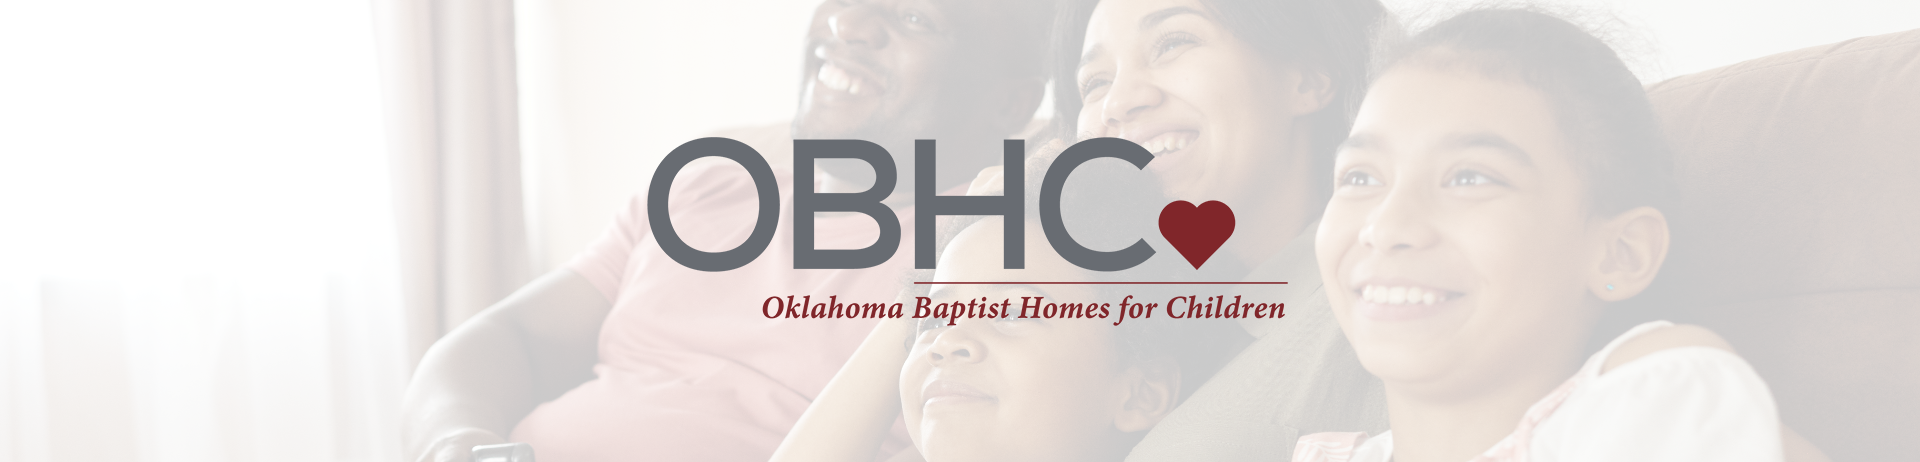 OBHC logo with photo of happy family on couch in background